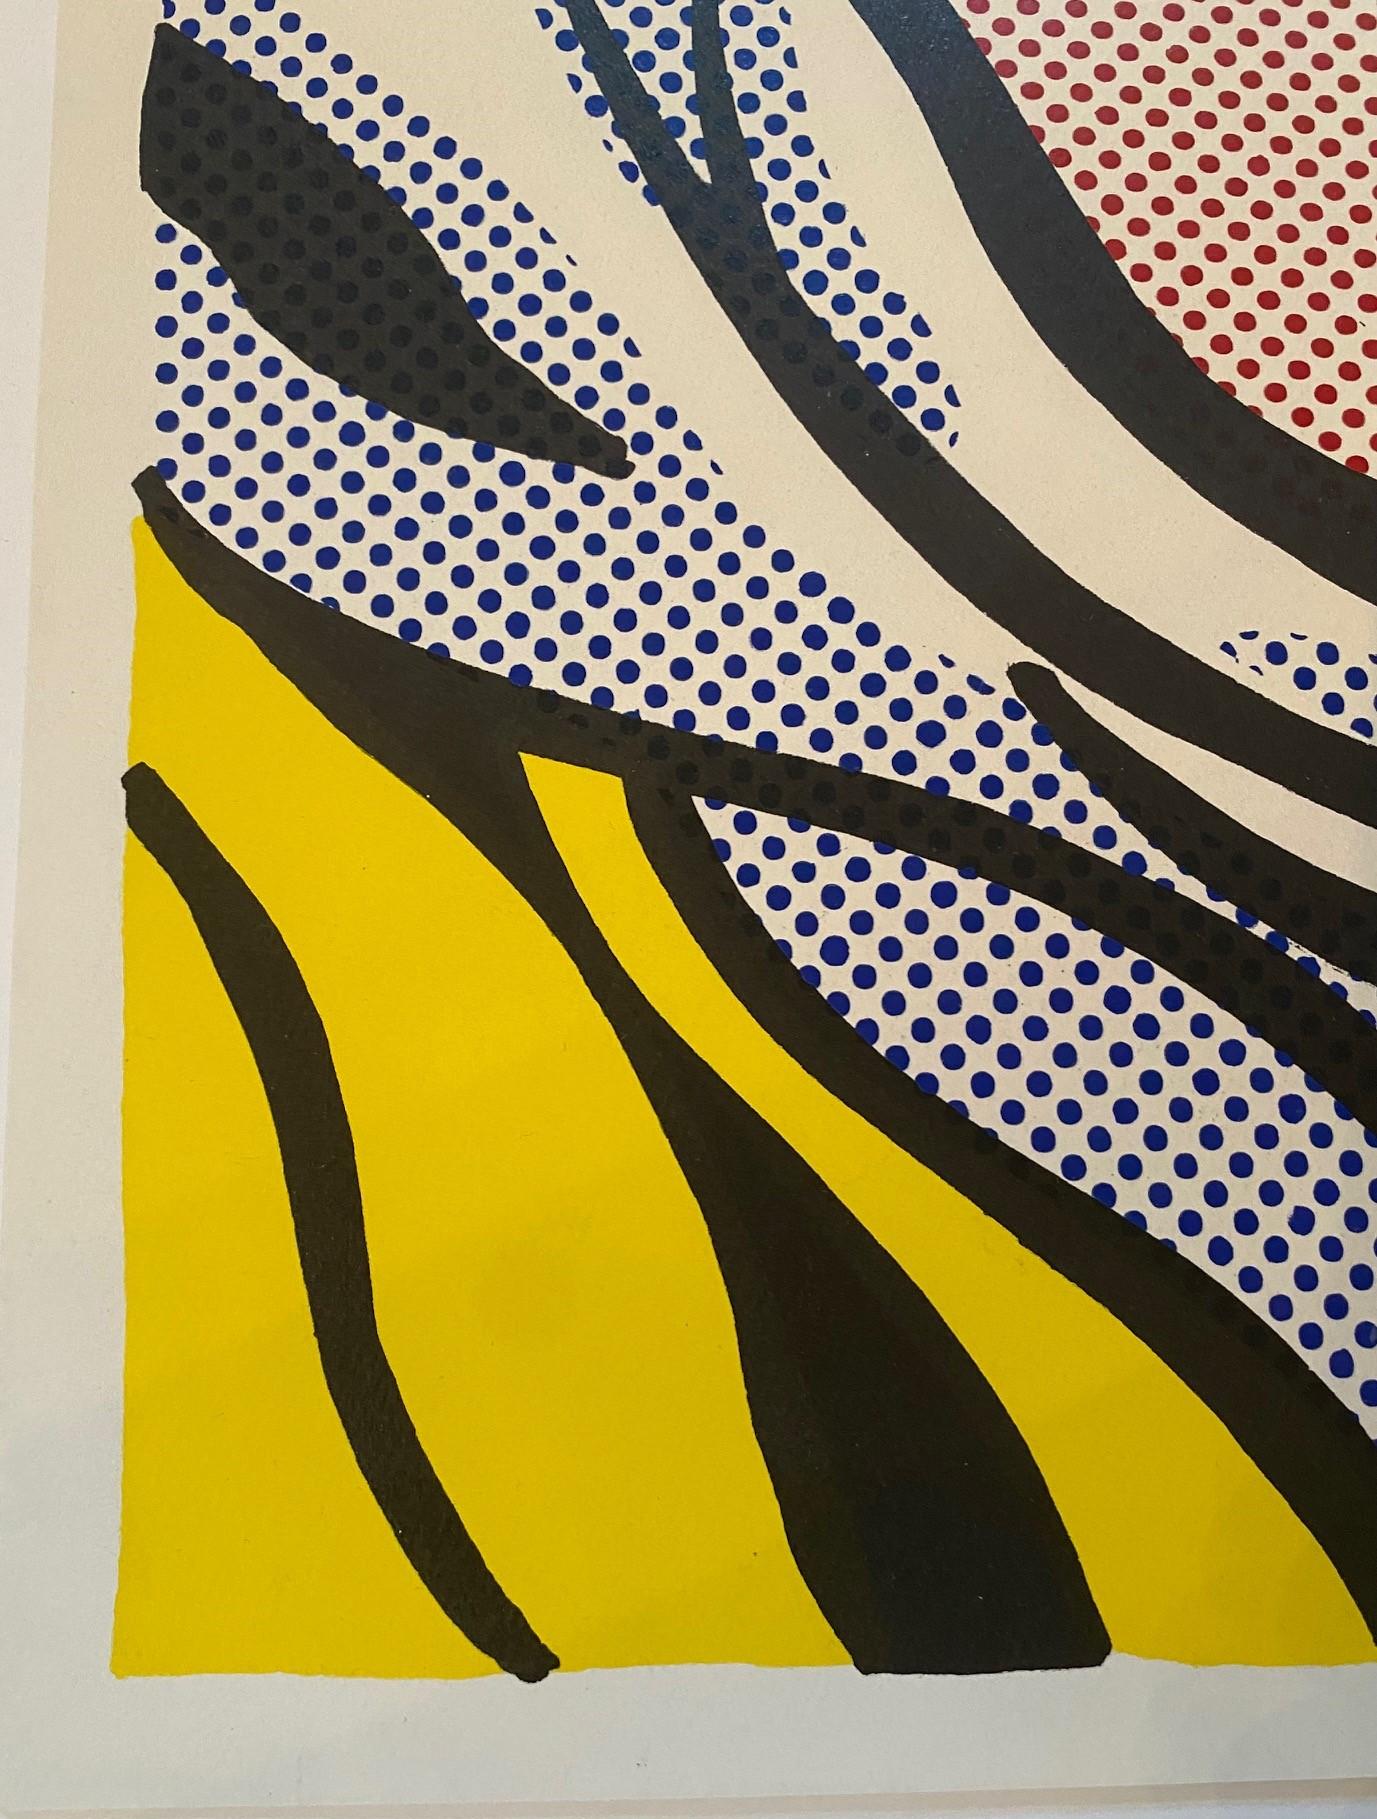 Offset Lithograph from an edition of unknown size.  Signed (rf Lichtenstein) in pencil lower right.. Publisher Leo Castelli Gallery, New York. Printed by Graphic Industries Inc., New York. Catalogue Raisonne The Prints of Roy Lichtenstein 1948-1997: